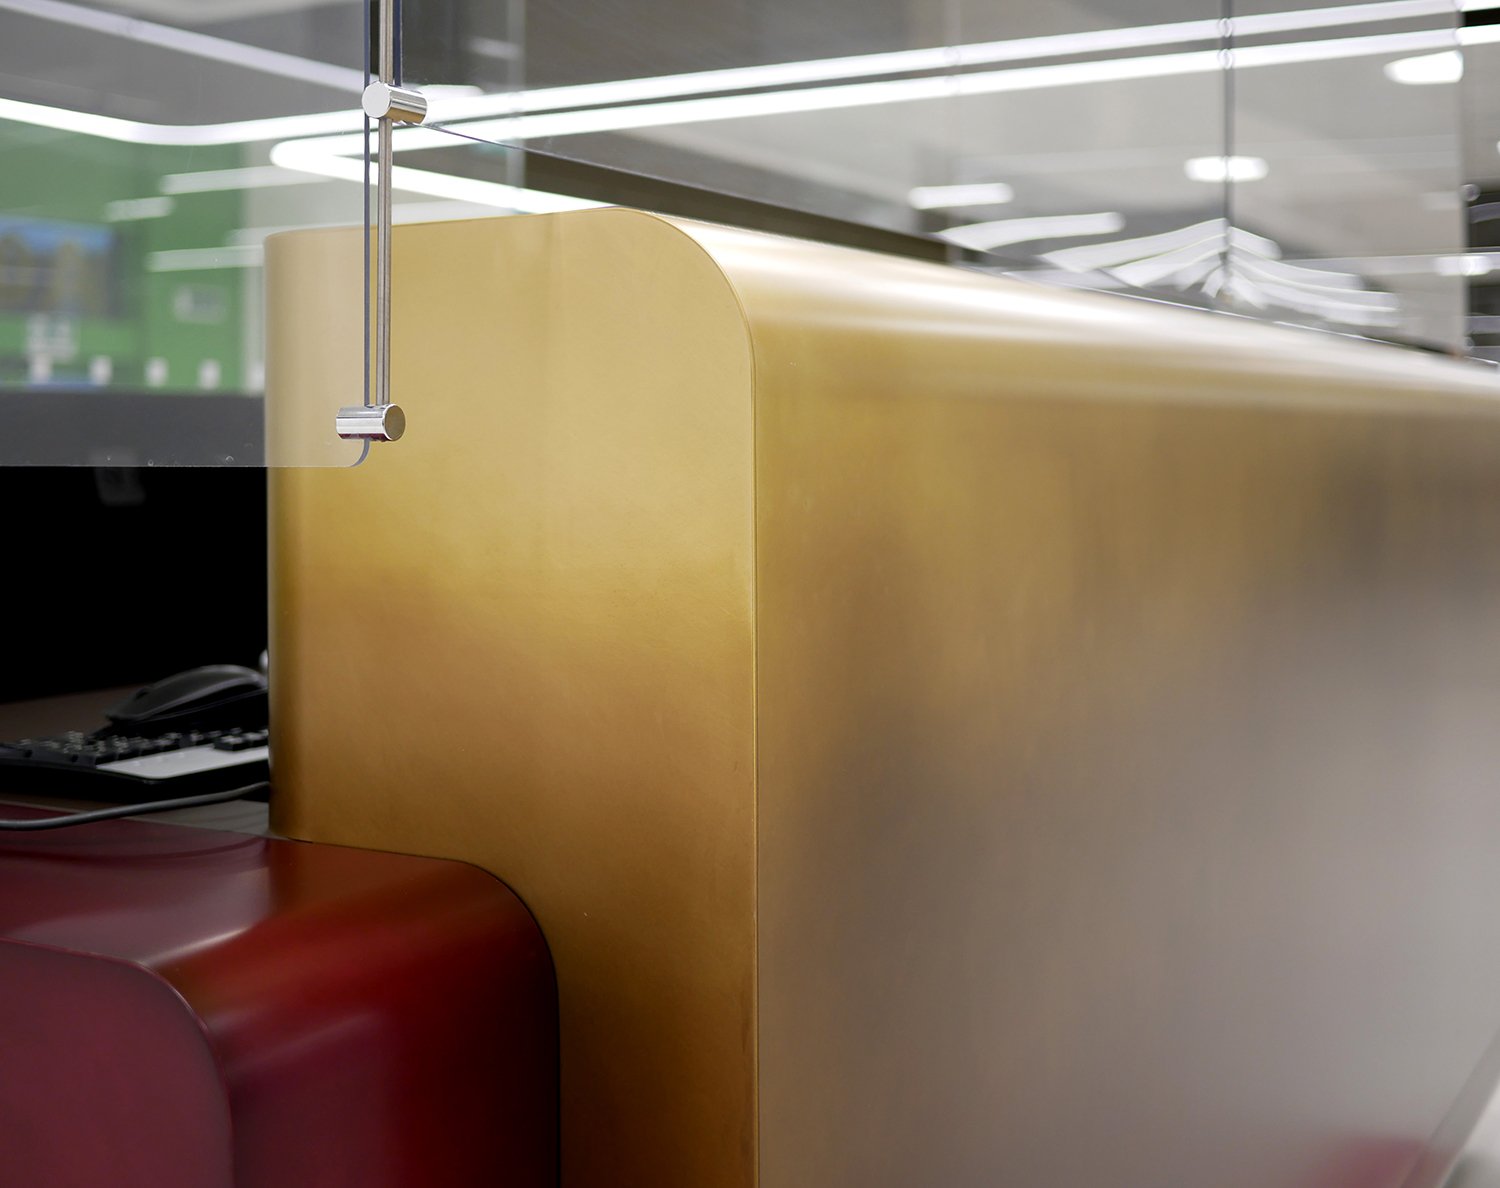 Particular of a Check-in Desk- metal front cover with  acid / brass finish | Antonio De Martino